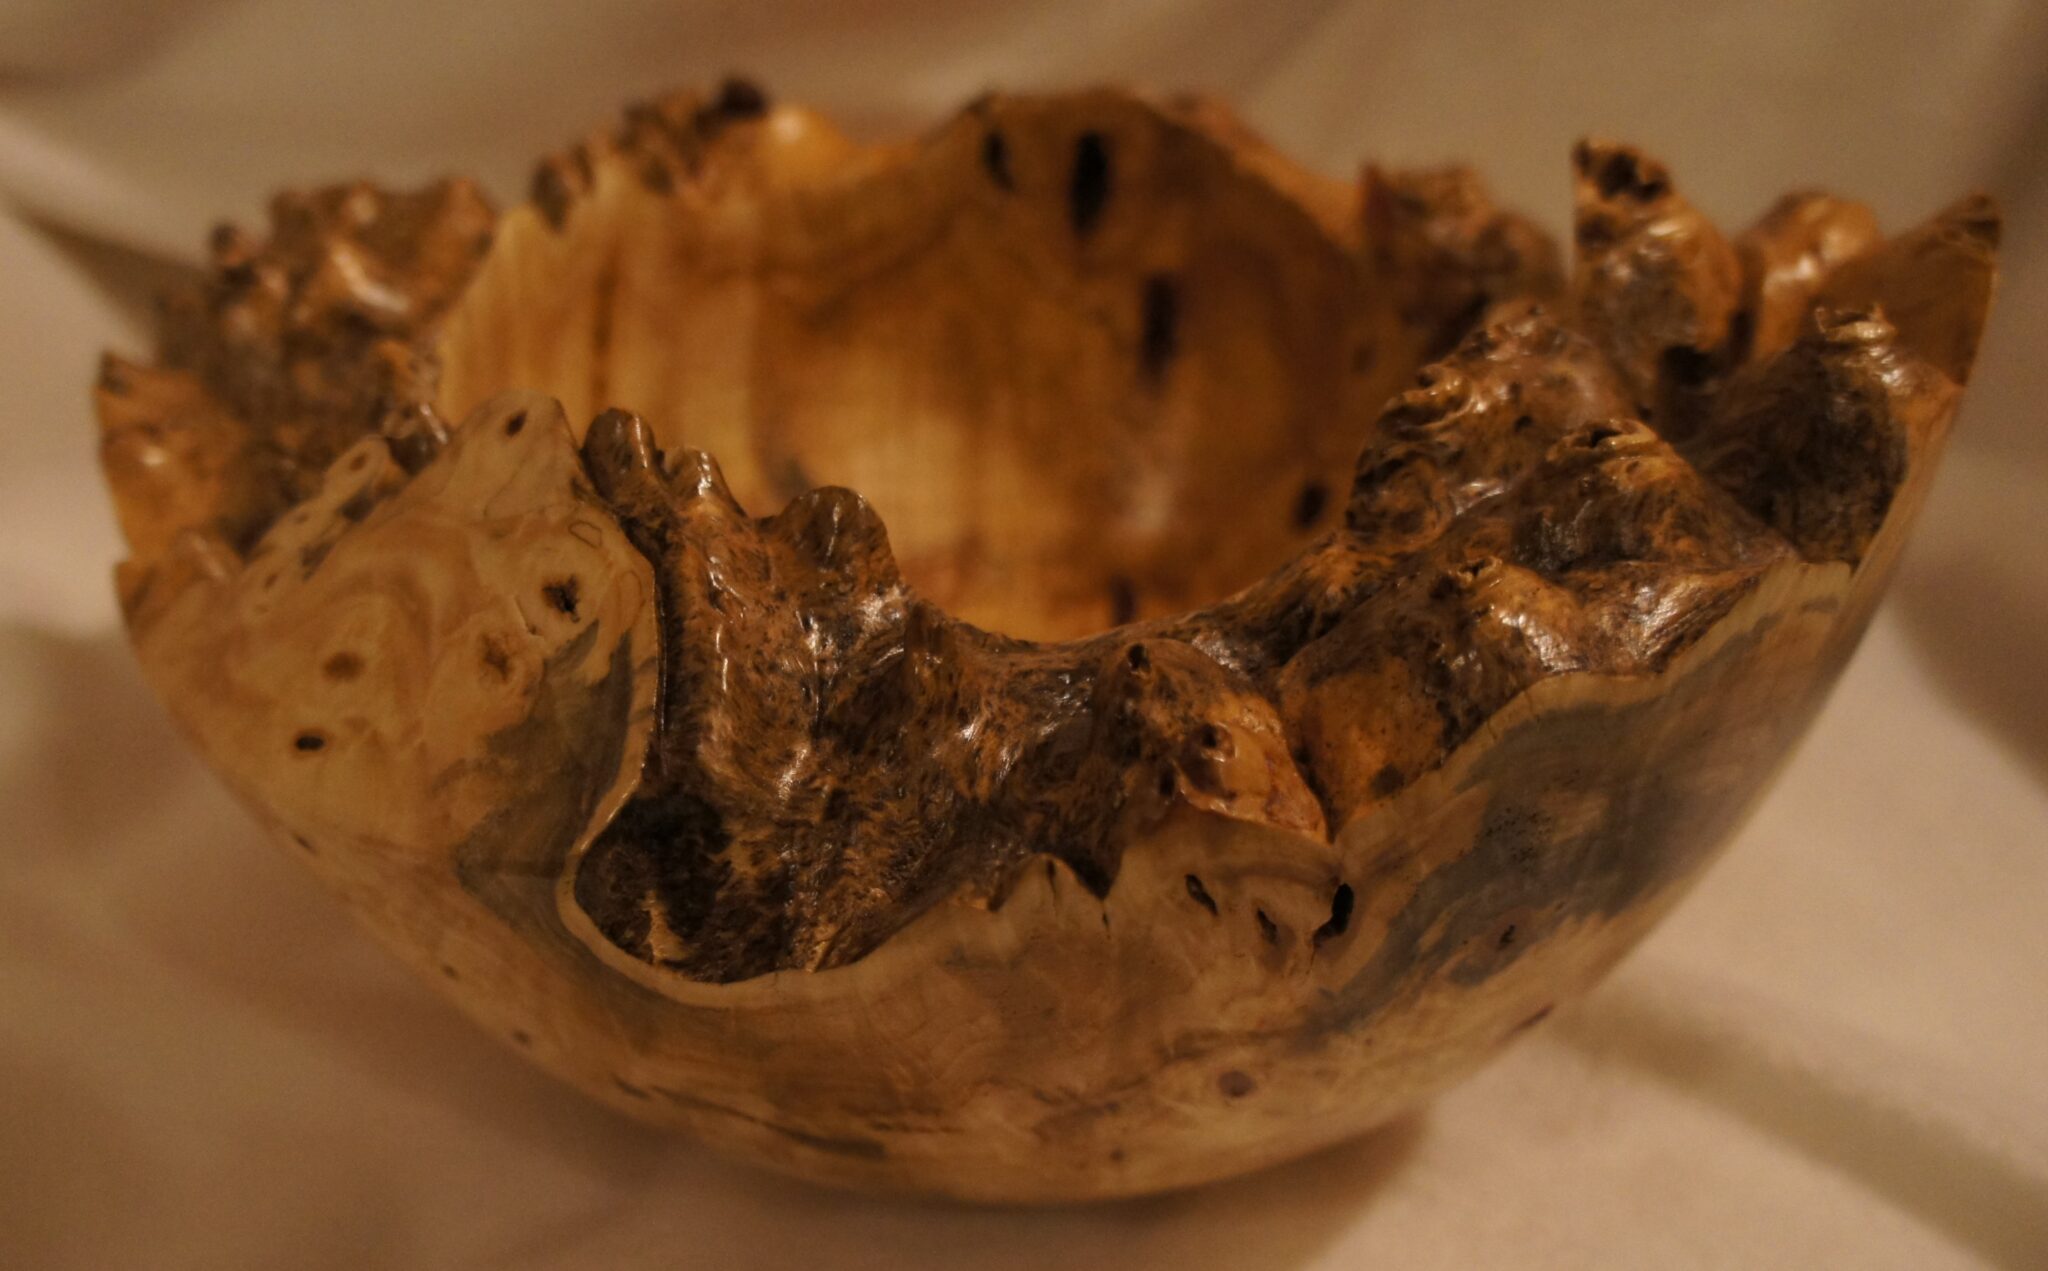 Another view of the Buckeye Burl